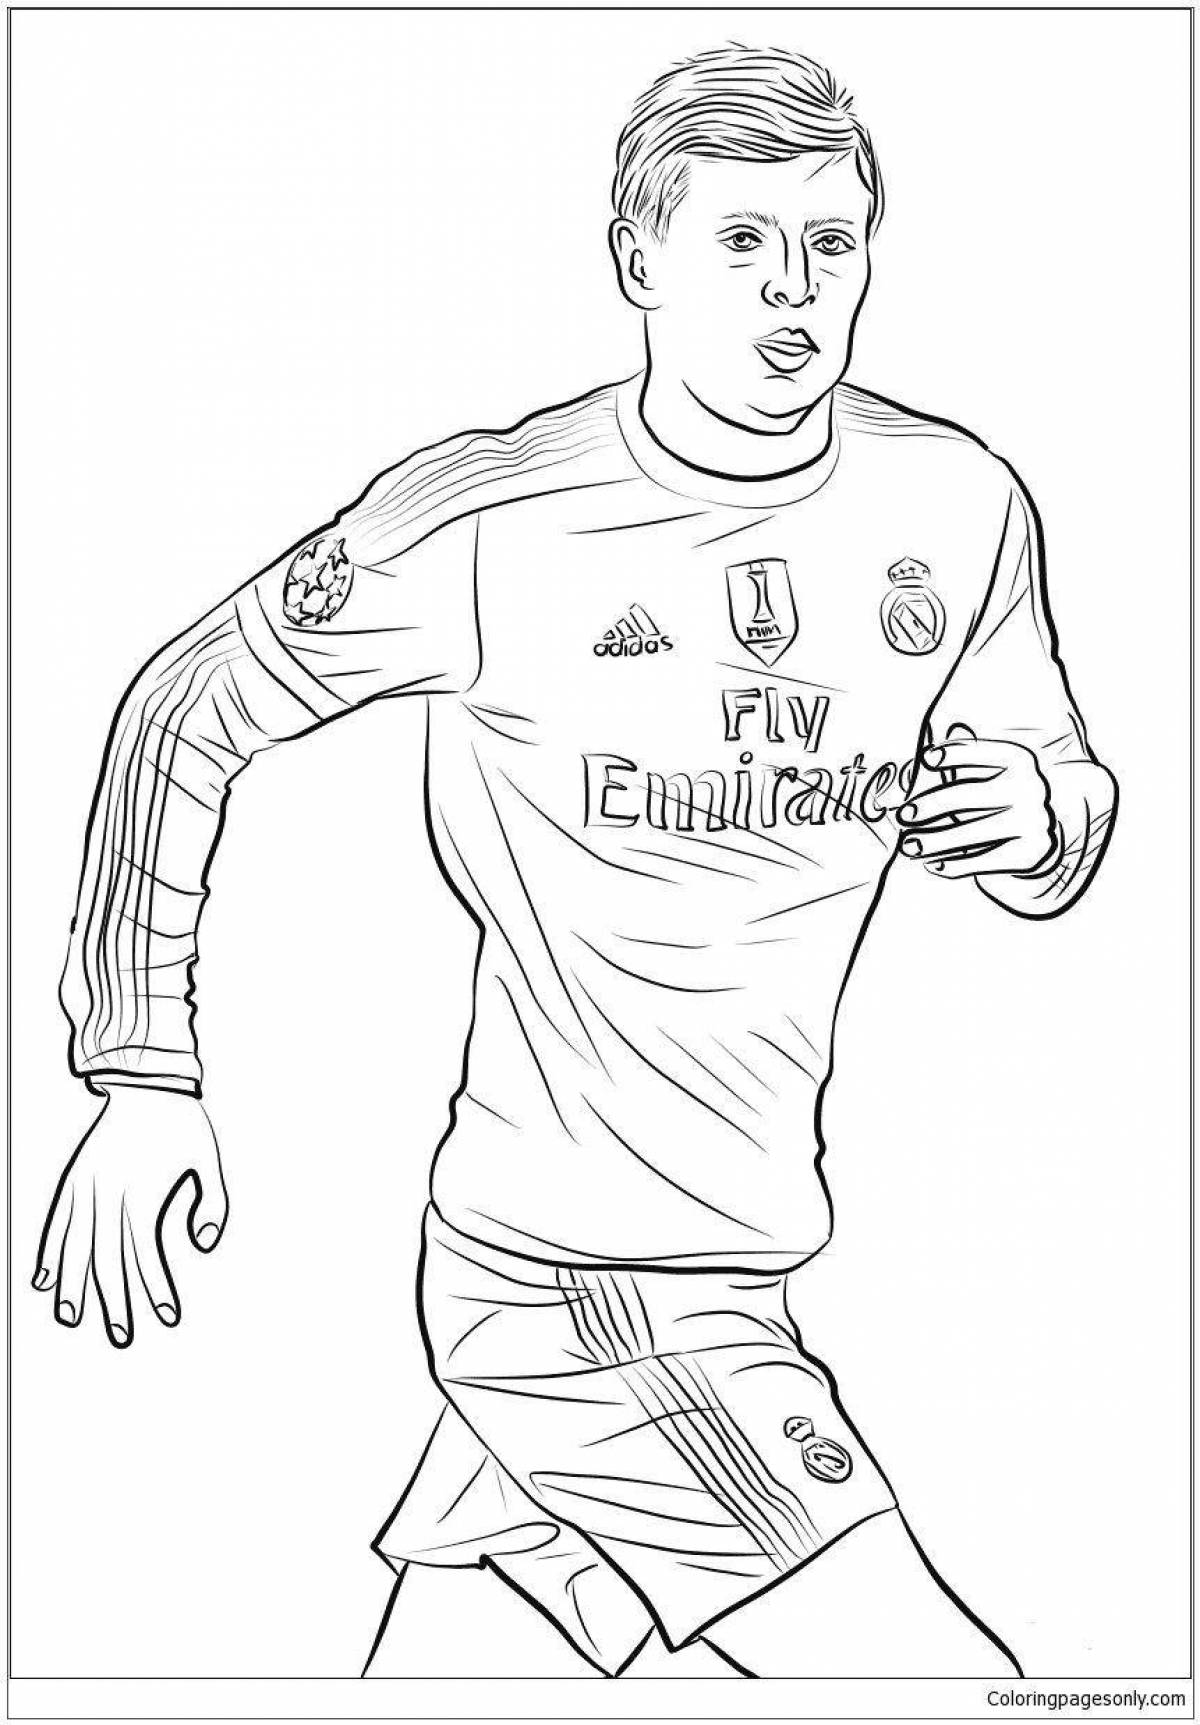 Attractive coloring pages of famous football players